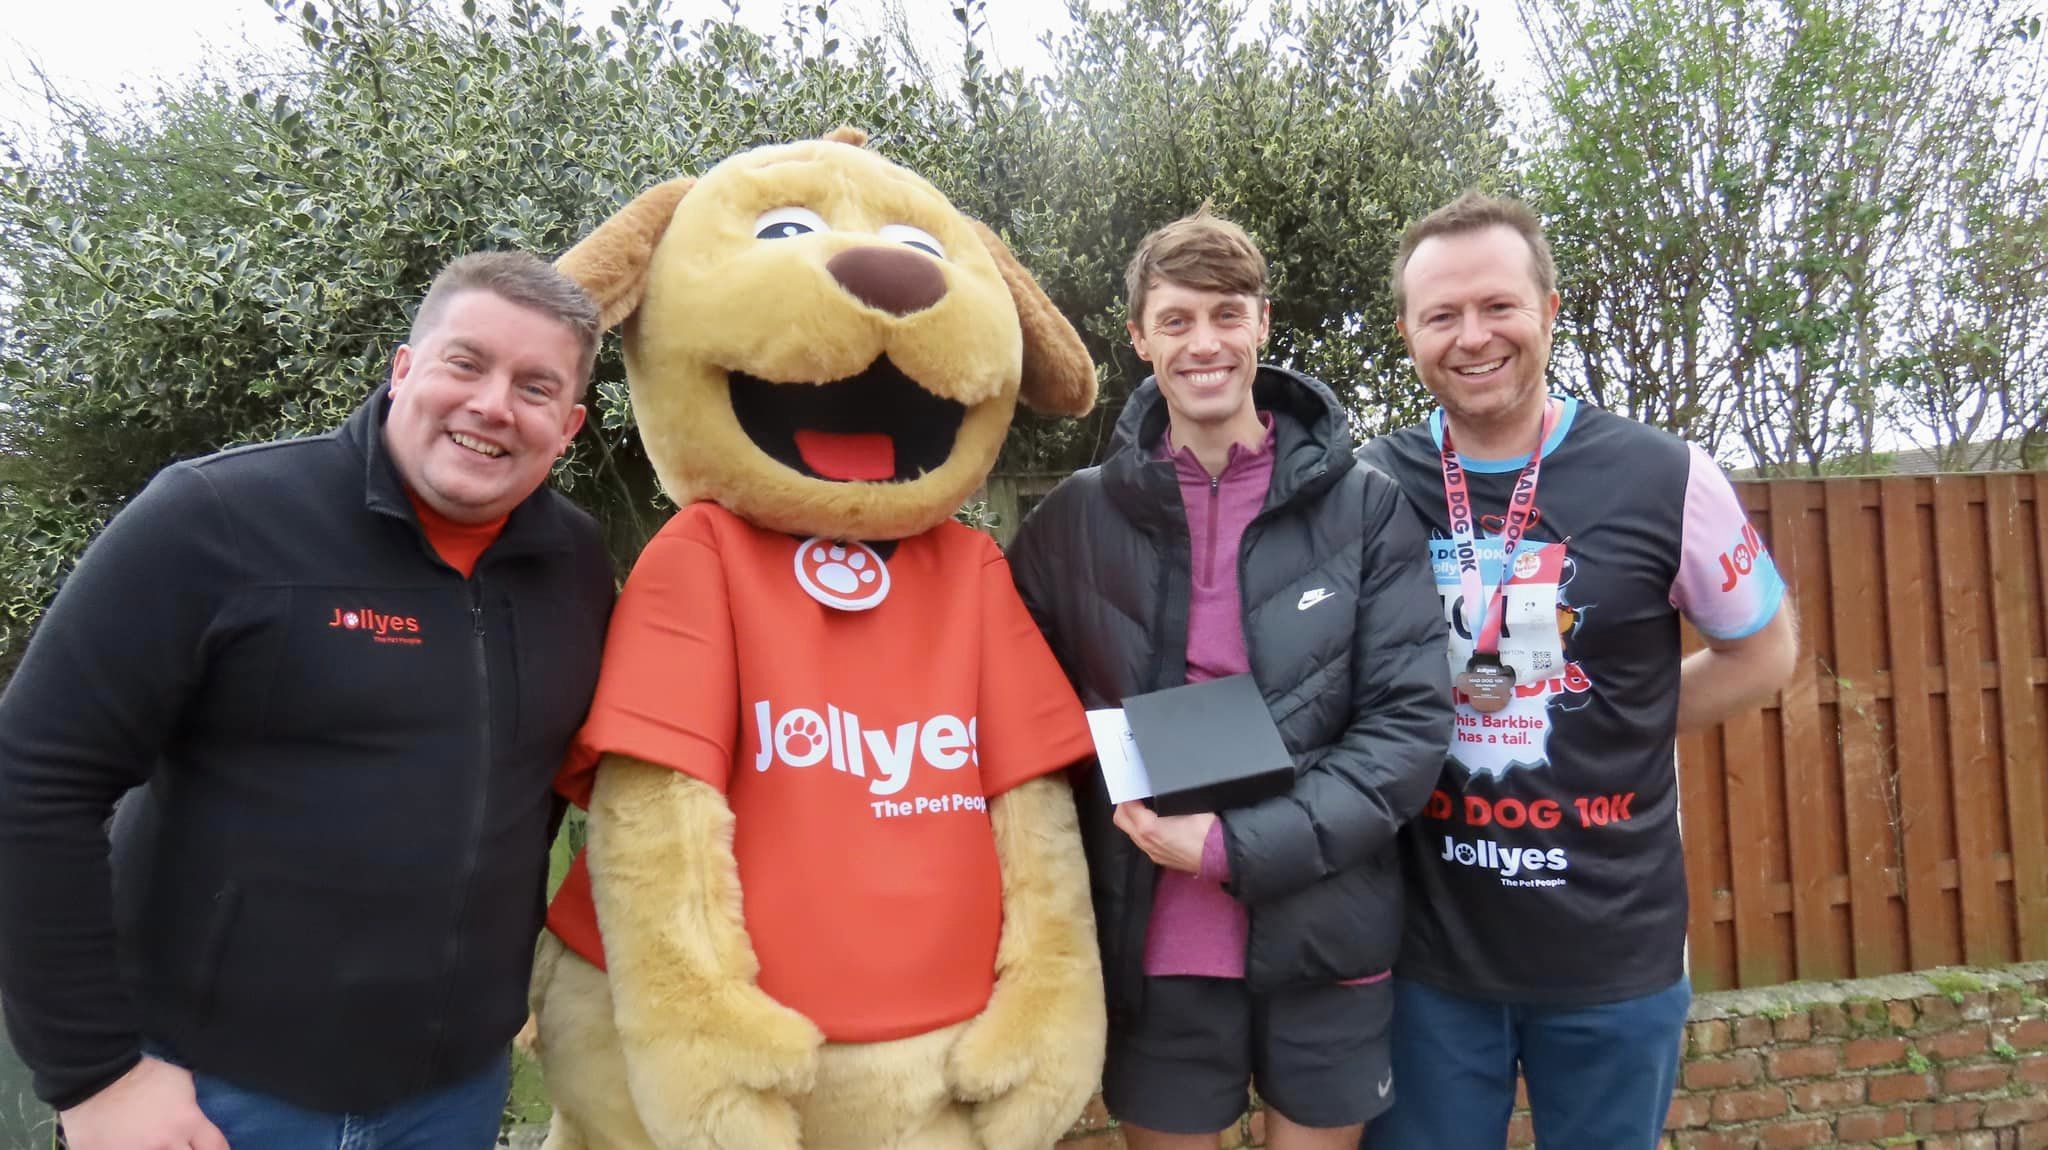 Hundreds of runners enjoyed the Southport Mad Dog 10lk run sponsored by Jollyes - The Pet People. Jollyes head of marketing Phil Turner-Naylor (left); Jollyes CEO Joe Wykes (right); and men's race winner Luke Minns 